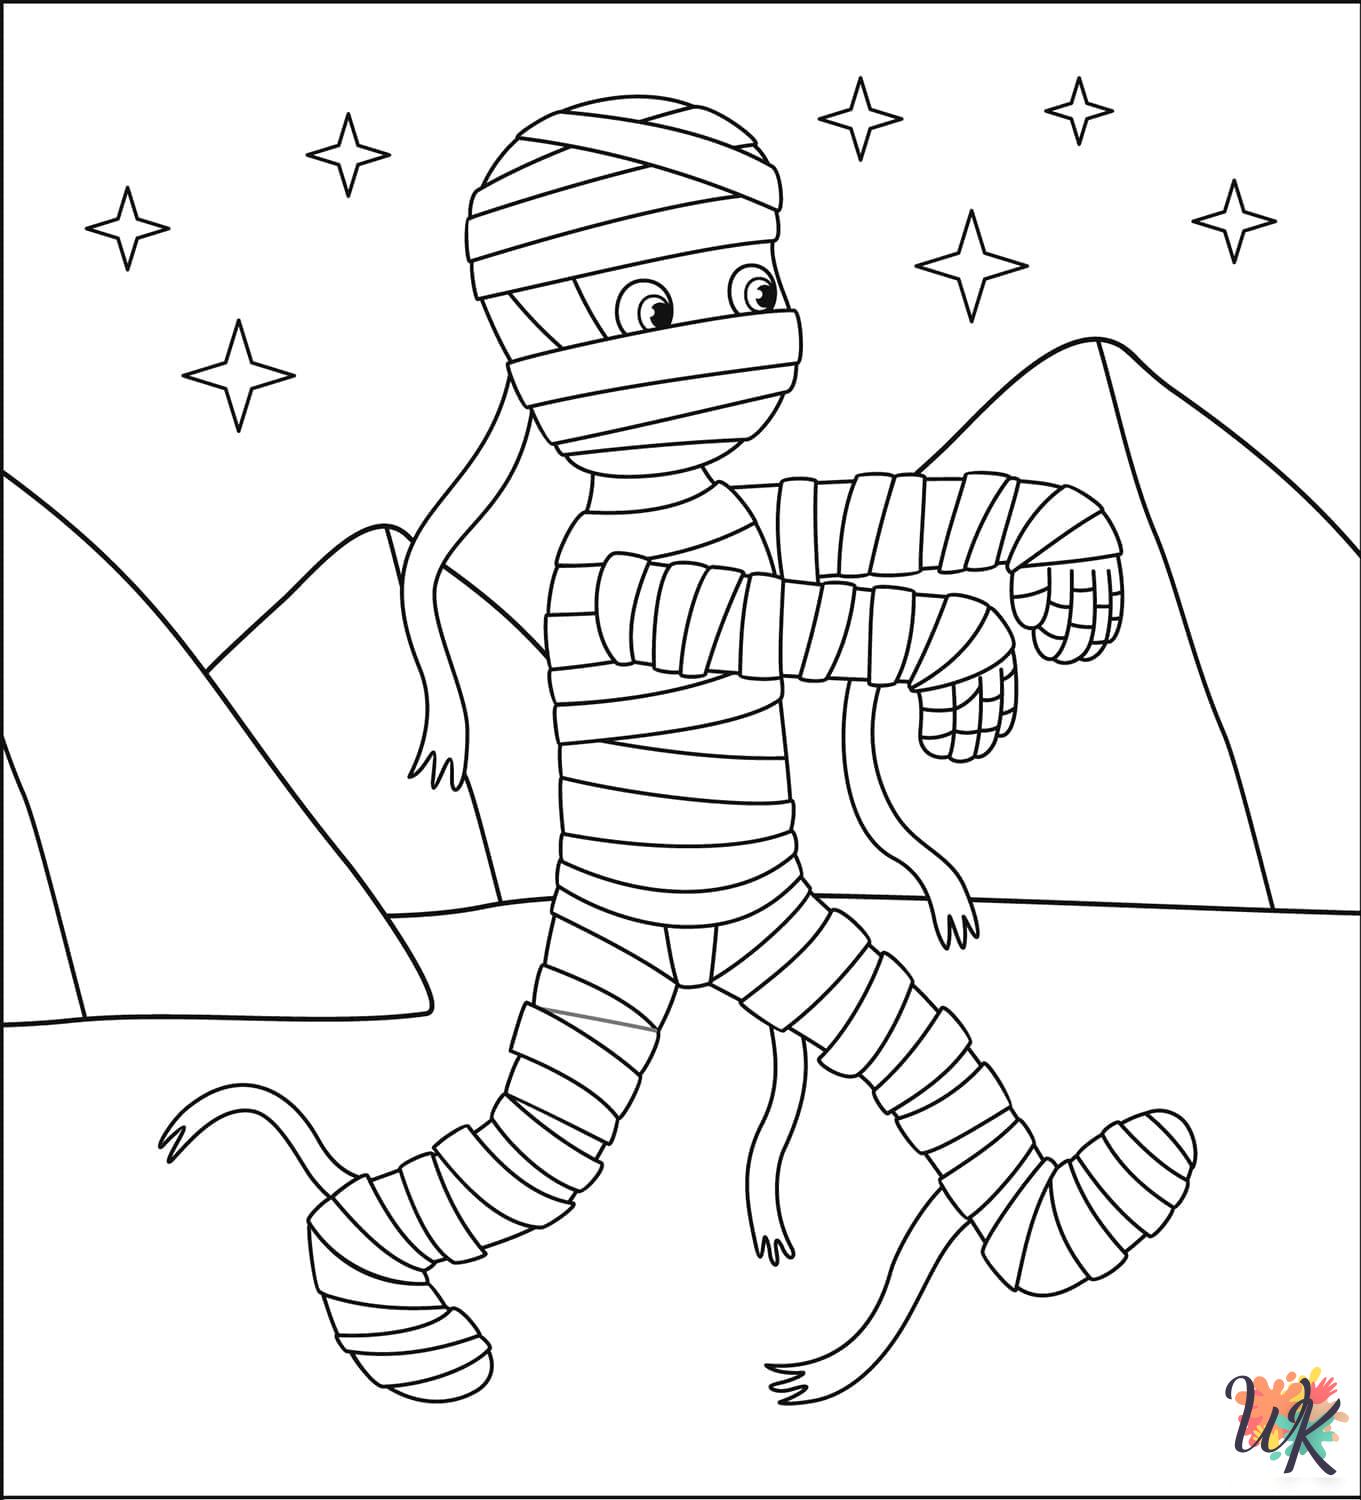 Mummy coloring pages pdf 1